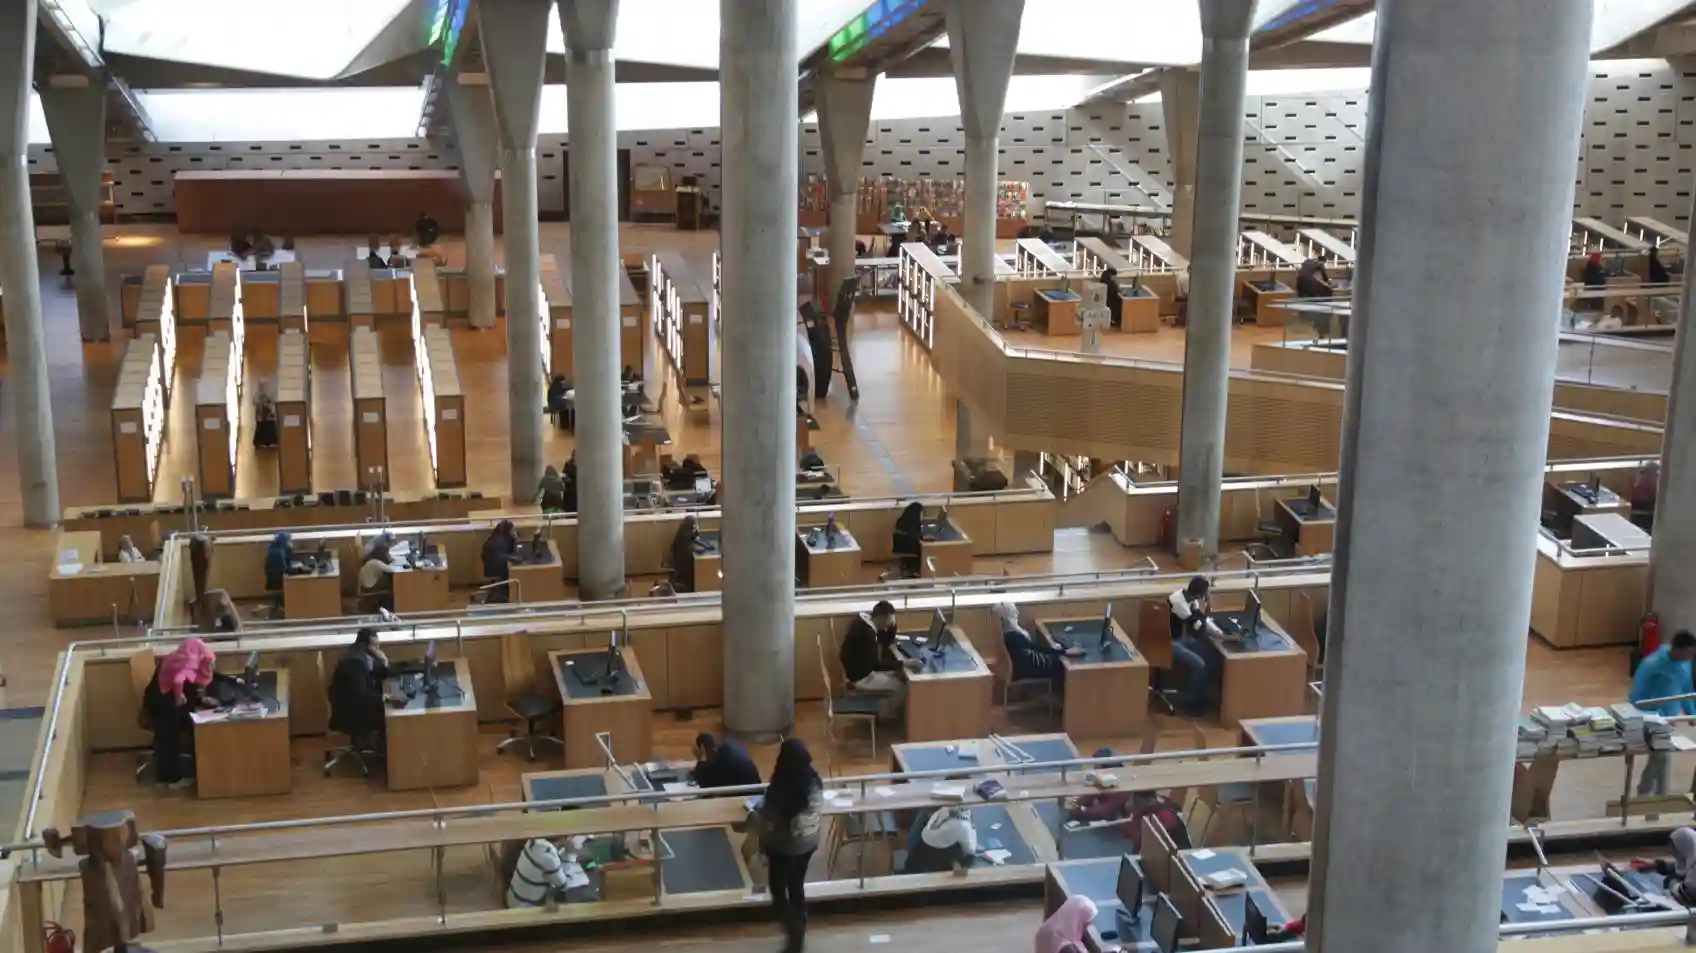 Alexandria library from the inside 2 G, Egypt travel booking, Egypt travel booking